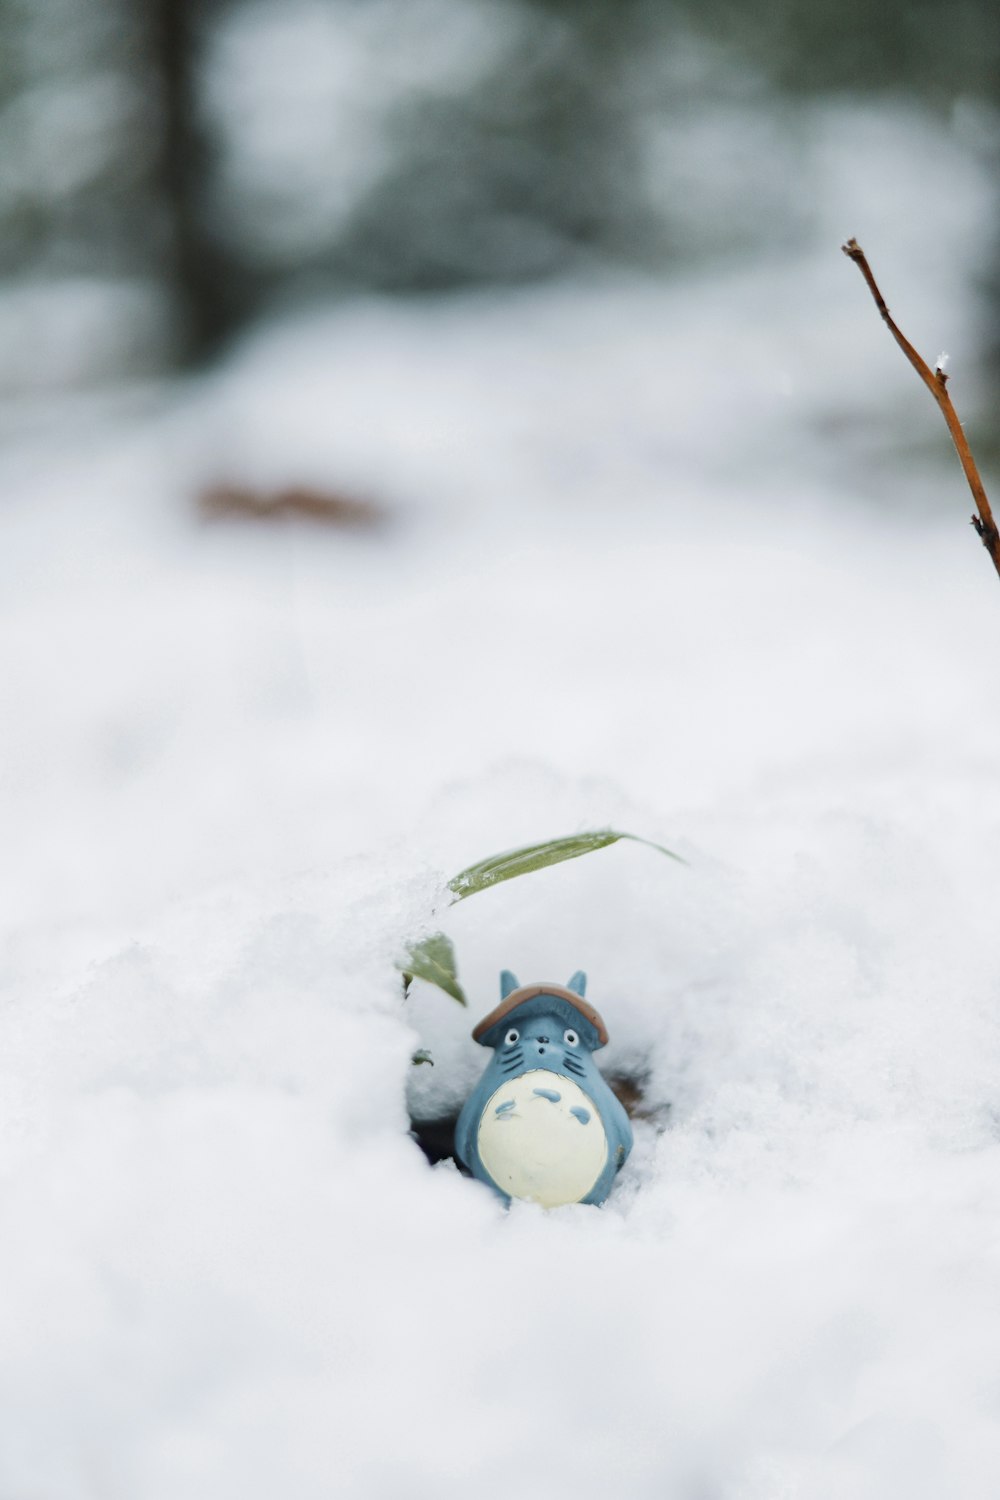 a small toy in the snow with trees in the background